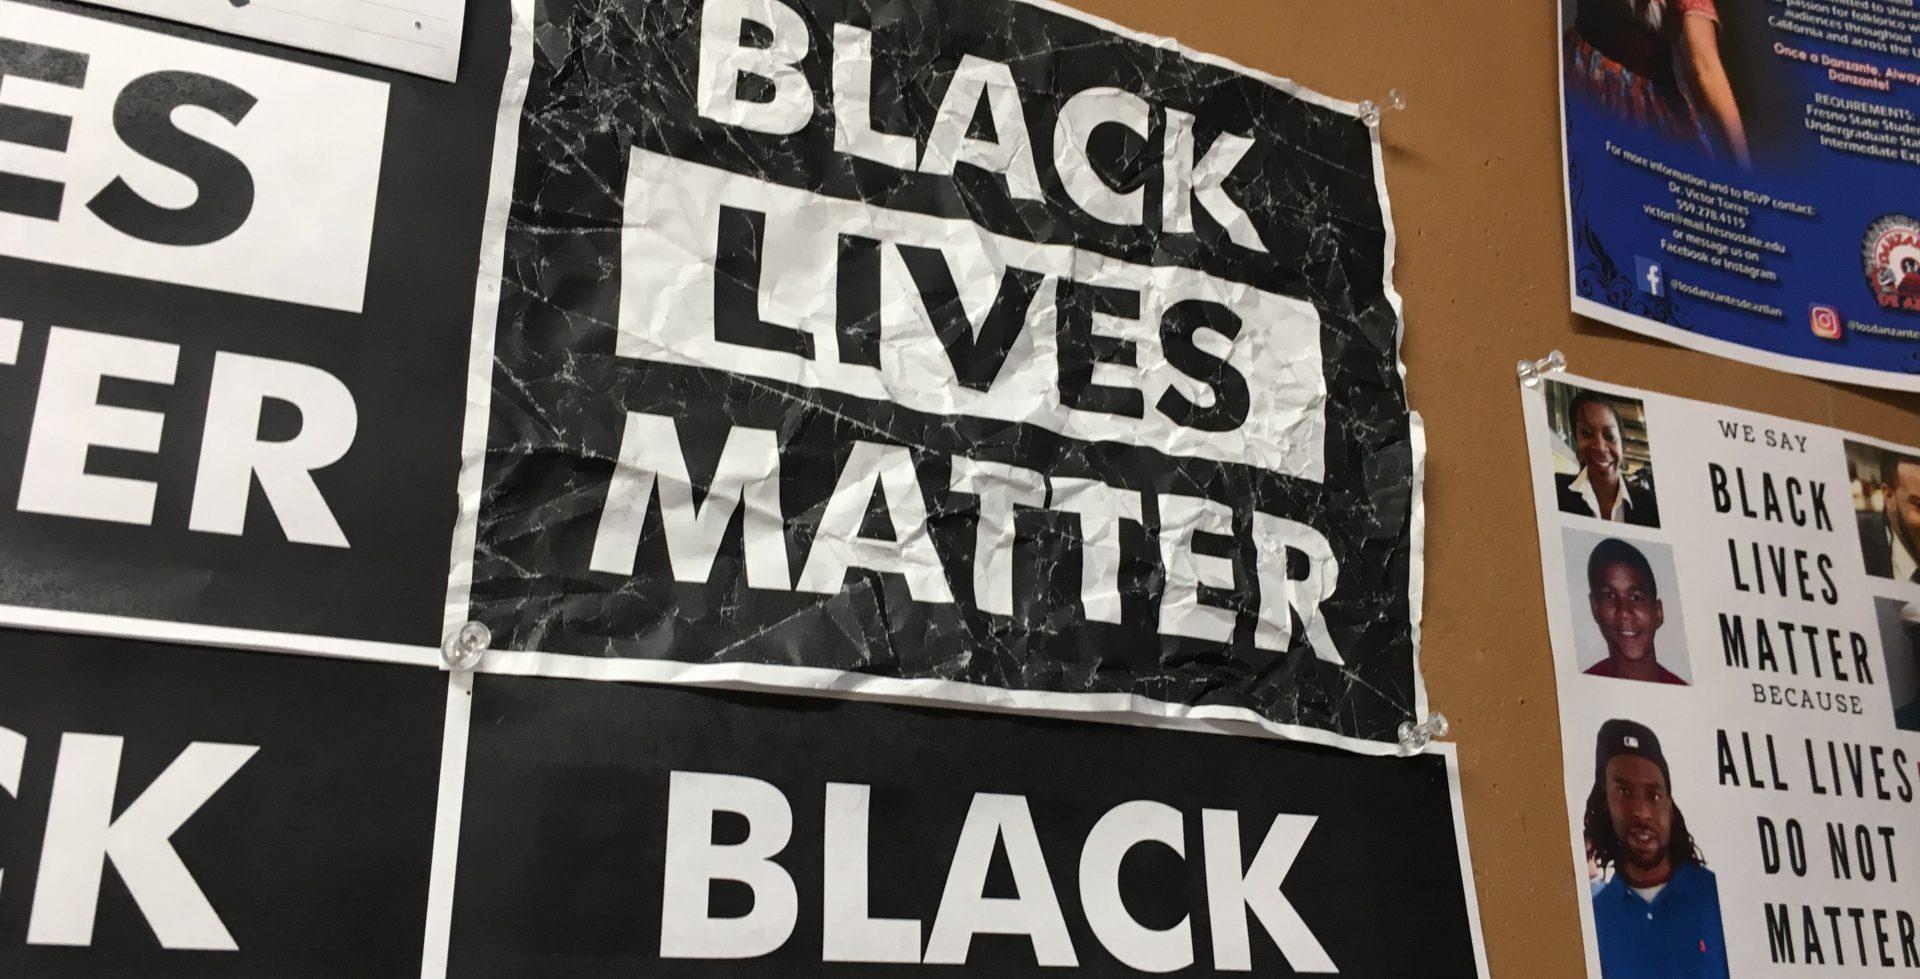 Black+Lives+Matter+posters+were+reportedly+vandalized+outside+the+office+of+a+professor+in+the+Social+Sciences+Building.+Fresno+State+President+Dr.+Josep+Castro+acknowledged+the+incident+in+an+email+to+the+campus.+%28Cresencio+Rodriguez%2FThe+Collegian%29